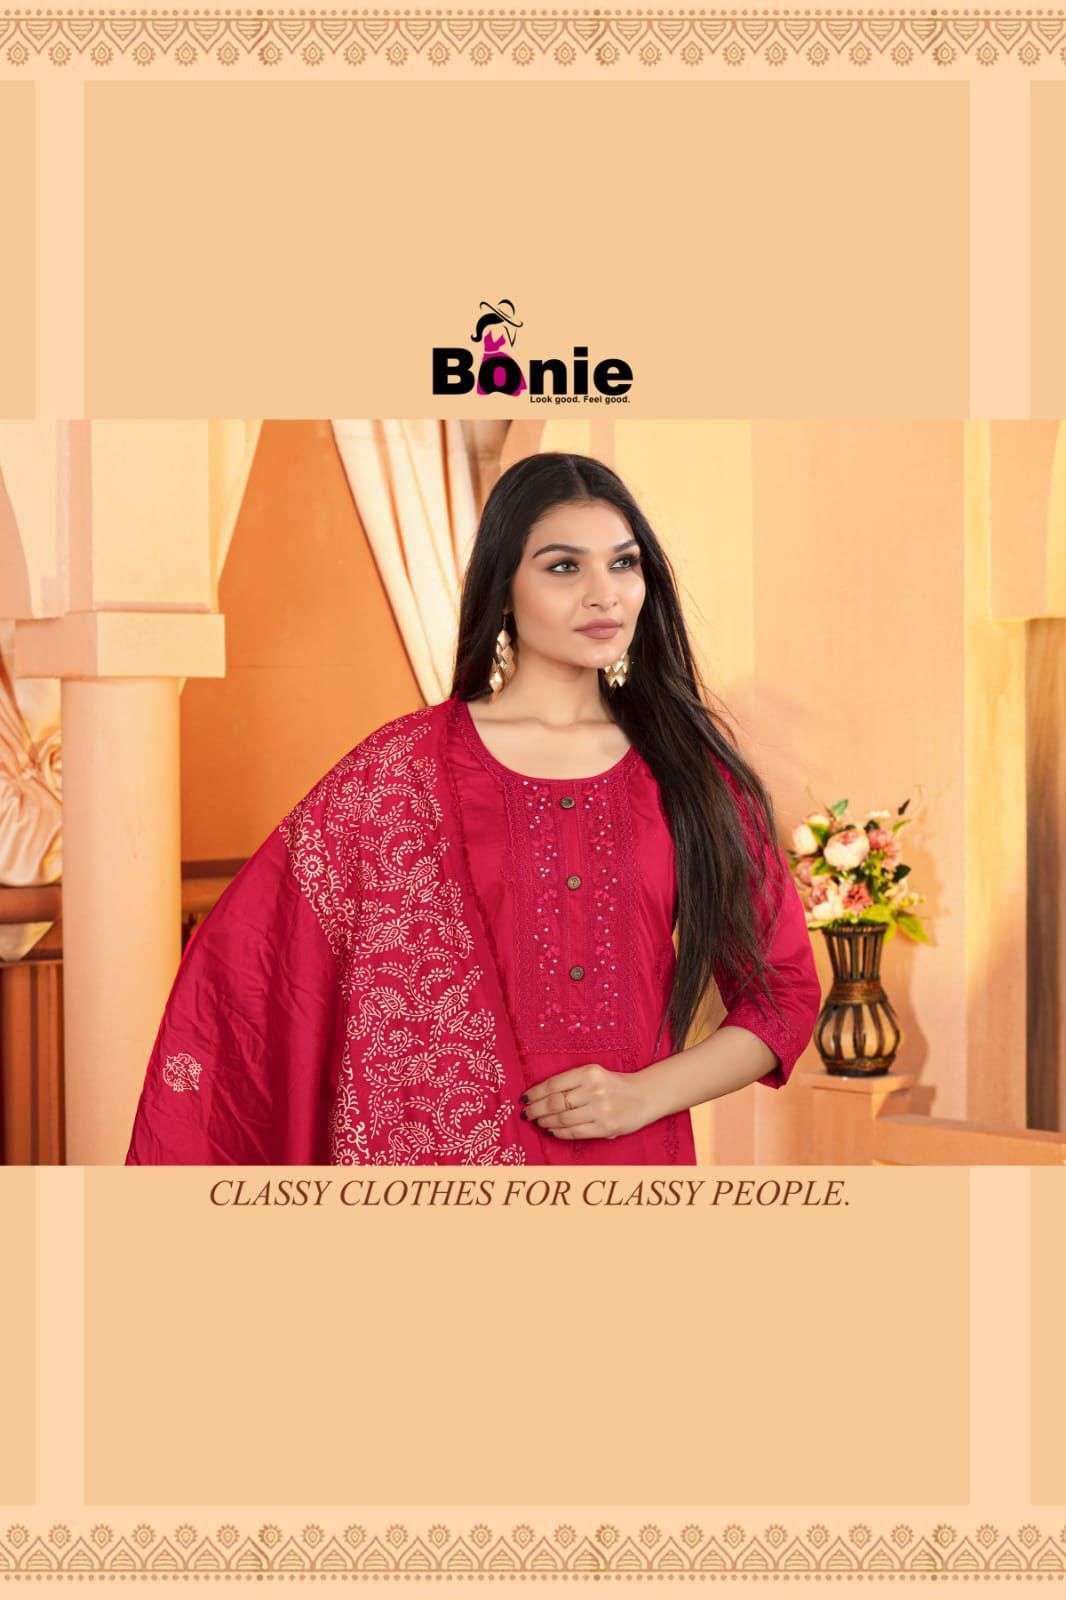 Bonie Flora Vol 4 Chanderi With Lining Inside With Amazing Embroidery On Wholesale